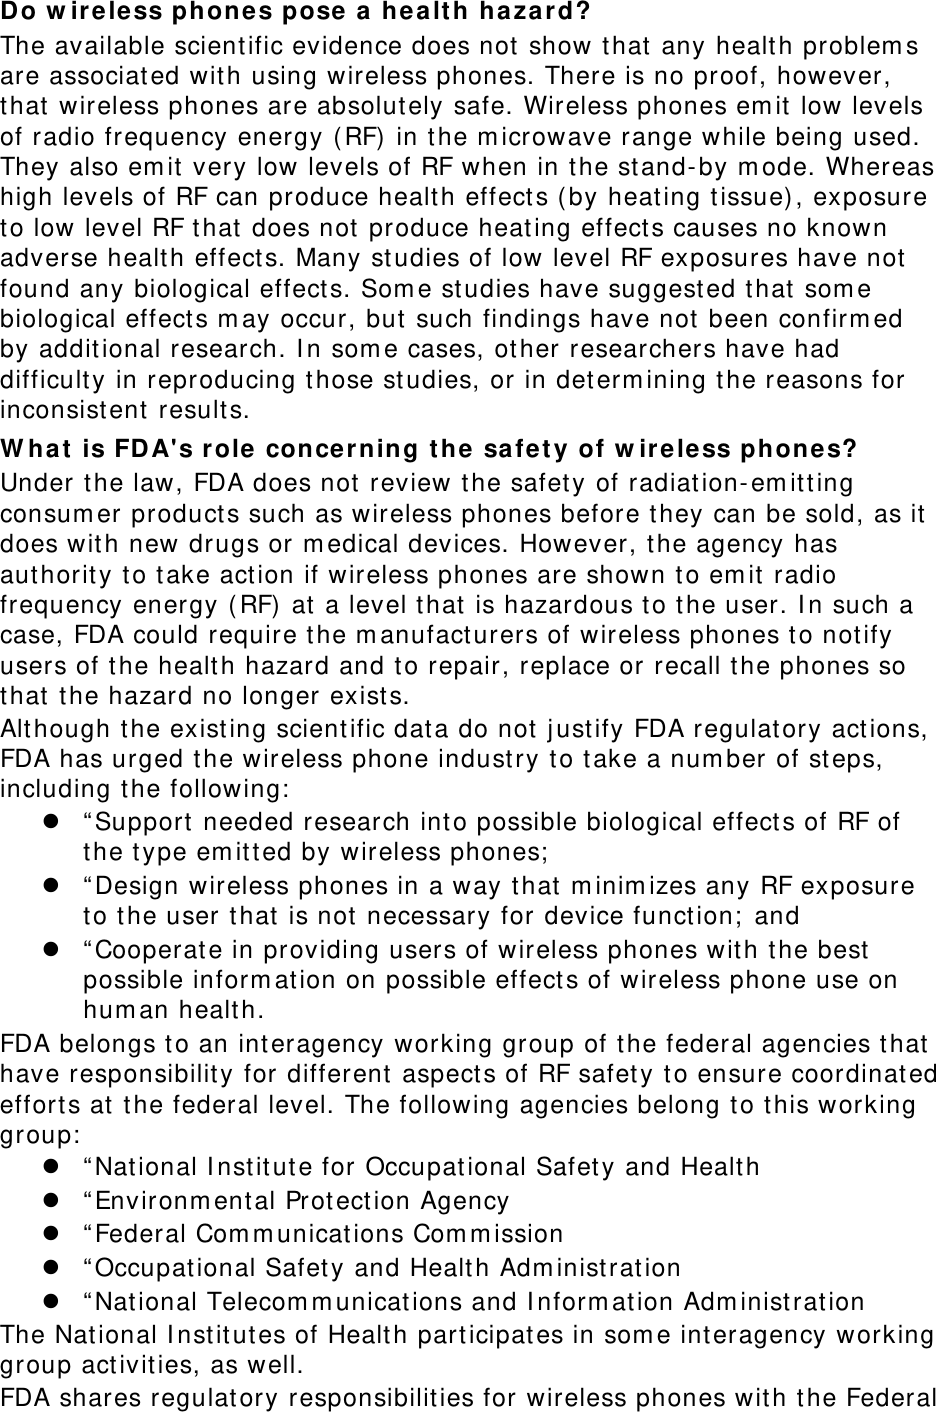 Do w irele ss phone s pose a h ea lt h hazar d? The available scient ific evidence does not  show that any health problem s are associated wit h using wireless phones. There is no proof, however, that wireless phones are absolut ely safe. Wireless phones em it low levels of radio frequency energy ( RF) in t he m icrowave range while being used. They also em it very low levels of RF when in t he stand- by m ode. Whereas high levels of RF can produce health effect s ( by heat ing t issue) , exposure to low level RF that  does not  produce heating effect s causes no known adverse health effect s. Many st udies of low level RF exposures have not  found any biological effect s. Som e studies have suggest ed t hat som e biological effect s m ay occur, but  such findings have not been confirm ed by additional research. I n som e cases, ot her researchers have had difficulty in reproducing t hose studies, or in det erm ining t he reasons for inconsist ent results. W ha t is FD A&apos;s role  concer ning t he  safe t y of w ir ele ss ph ones? Under the law, FDA does not review the safet y of radiat ion- em itt ing consum er product s such as wireless phones before they can be sold, as it  does wit h new drugs or m edical devices. However, t he agency has aut hority to take act ion if wireless phones are shown t o em it radio frequency energy ( RF)  at a level that  is hazardous t o t he user. I n such a case, FDA could require t he m anufact urers of w ireless phones t o not ify users of t he health hazard and t o repair, replace or recall t he phones so that the hazard no longer exist s. Alt hough t he existing scient ific dat a do not j ust ify FDA regulat ory actions, FDA has urged the wireless phone industry to t ake a num ber of st eps, including t he following:   “ Support  needed research int o possible biological effect s of RF of the type em itt ed by wireless phones;   “ Design wireless phones in a way t hat m inim izes any RF exposure to the user t hat is not necessary for device funct ion;  and  “ Cooperat e in providing users of wireless phones with t he best  possible inform ation on possible effect s of wireless phone use on hum an healt h. FDA belongs to an int eragency working group of the federal agencies t hat have responsibility for different aspect s of RF safet y t o ensure coordinat ed effort s at the federal level. The following agencies belong t o t his working group:   “ Nat ional I nstit ut e for Occupational Safet y and Health  “ Environm ent al Prot ection Agency  “ Federal Com m unicat ions Com m ission  “ Occupational Safety and Health Adm inist ration  “ Nat ional Telecom m unications and I nform ation Adm inistrat ion The National I nstit ut es of Health participat es in som e interagency working group act ivit ies, as well. FDA shares regulatory responsibilit ies for wireless phones with t he Federal 